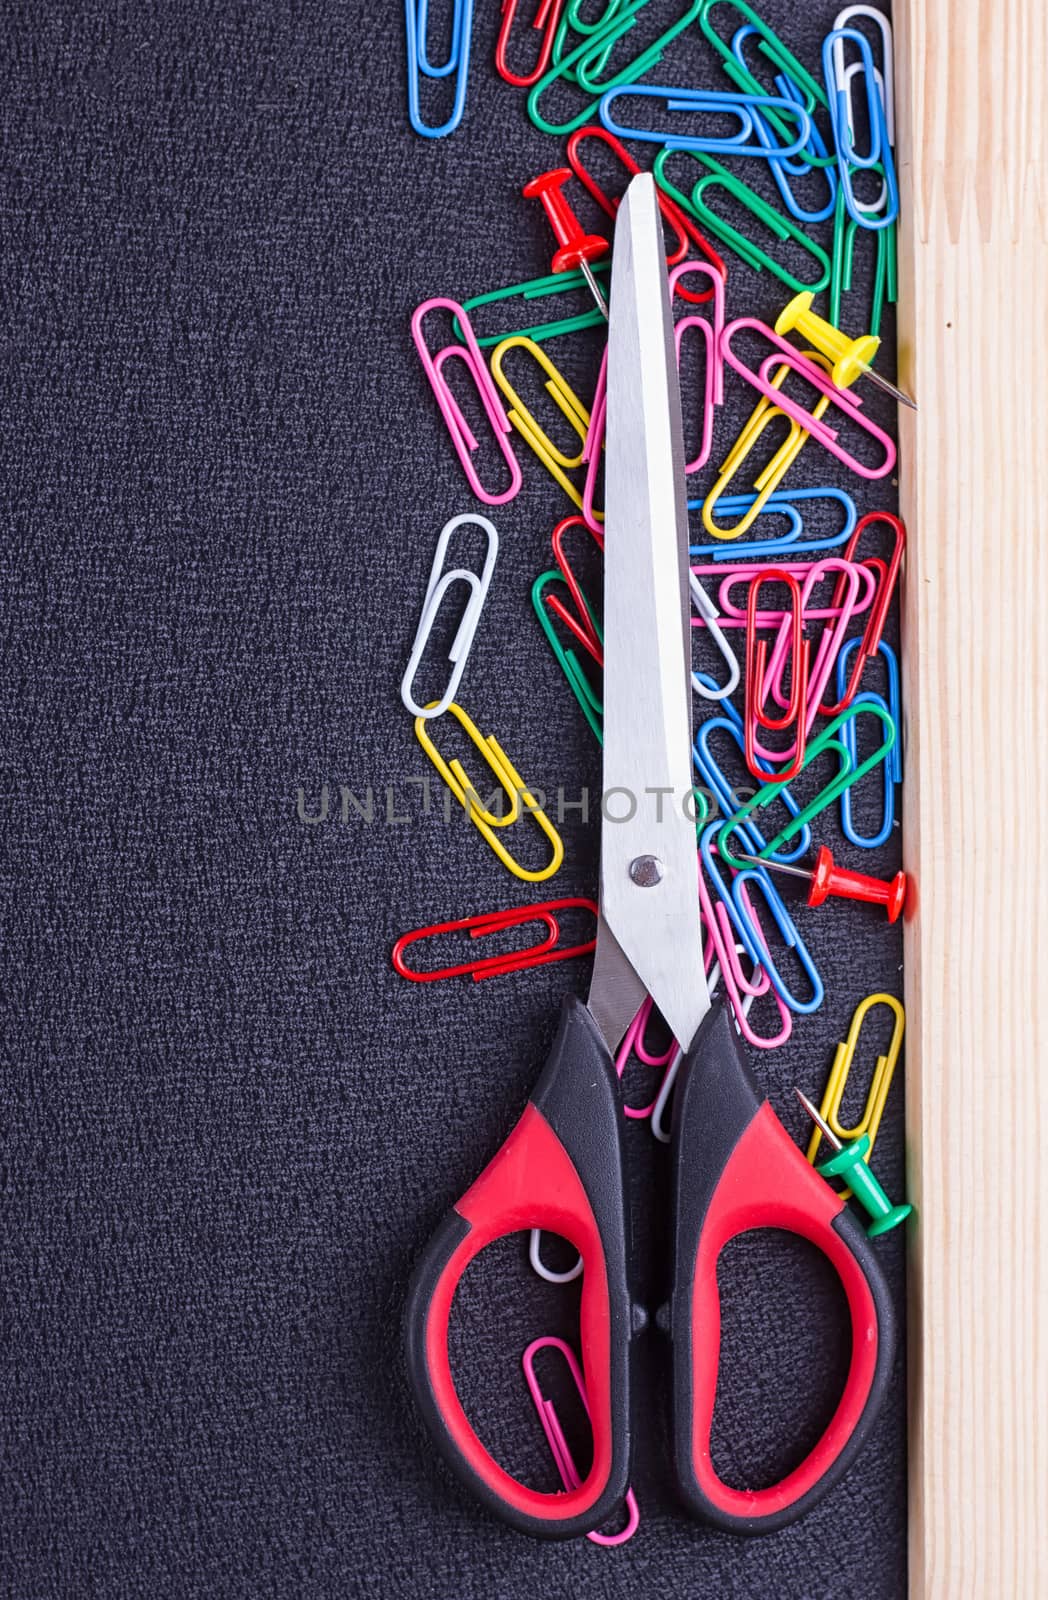 Scissors and paper clips on a black background